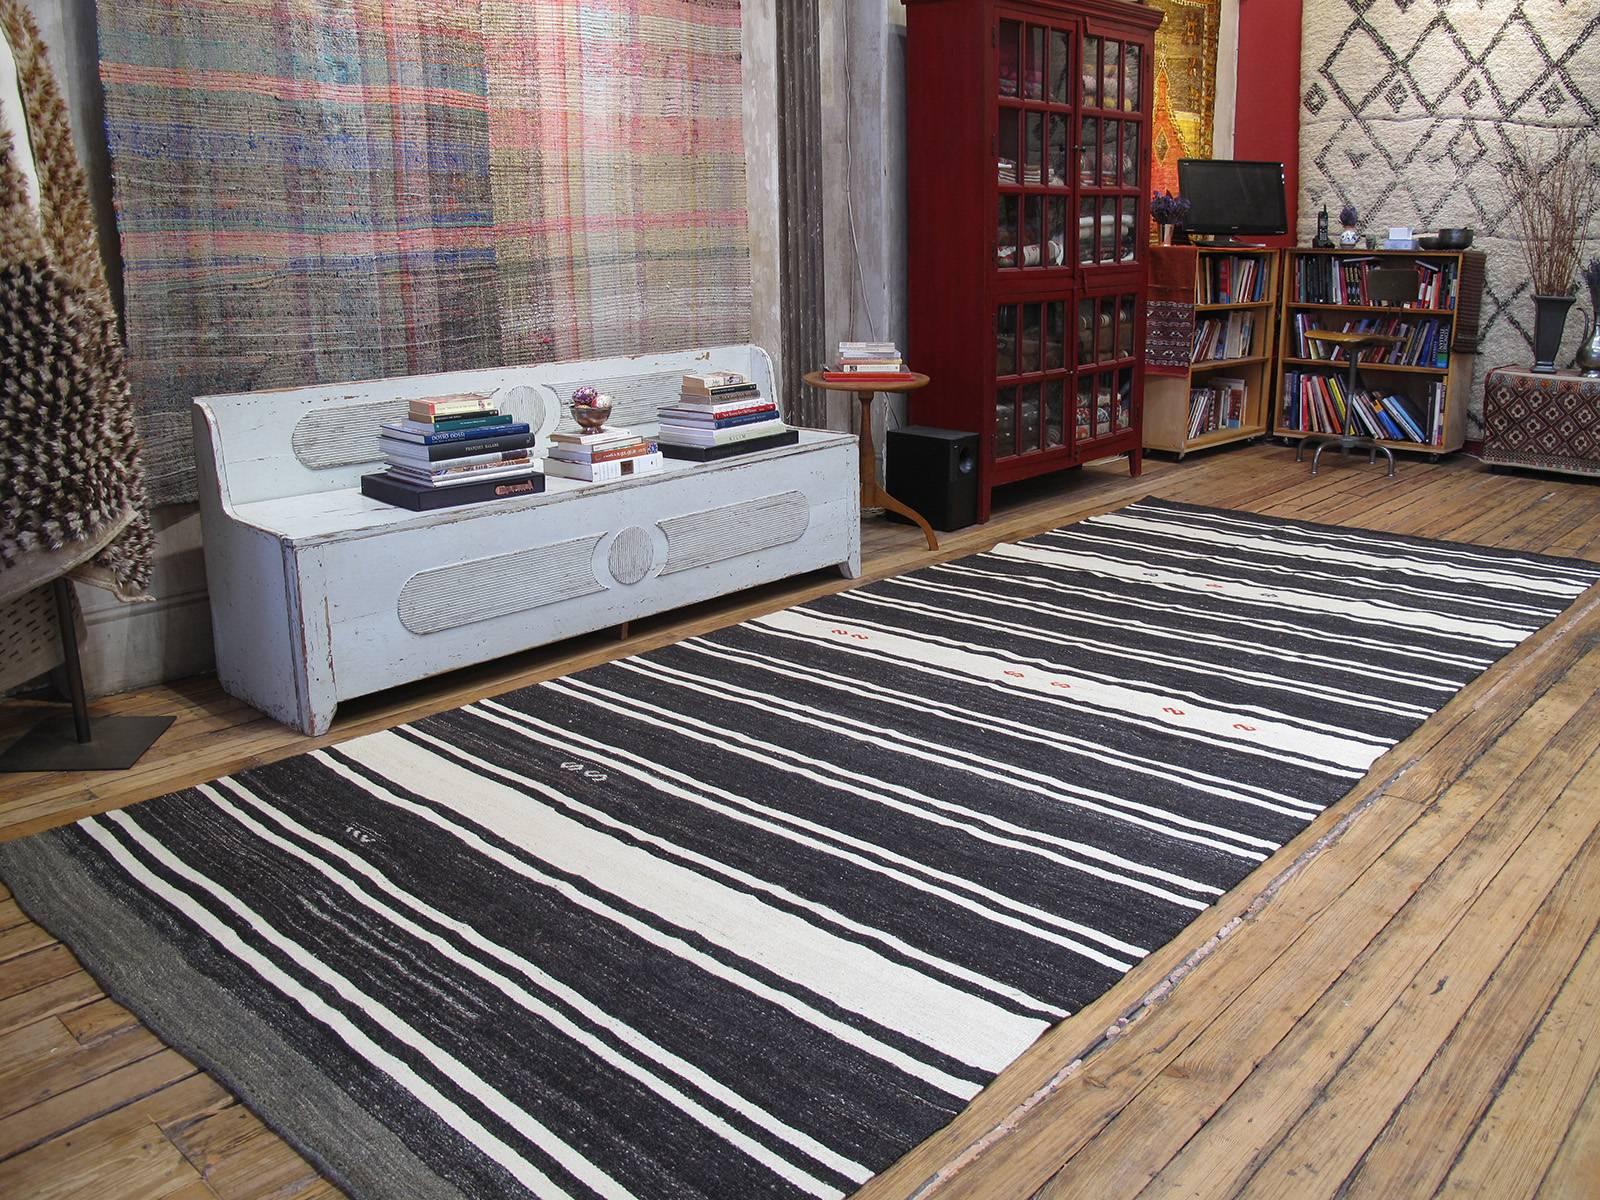 An old Kilim from Central Turkey in the characteristic wide runner format, woven with wool and goat hair in alternating dark brown (almost black) and off-white bands. A scattering of brocaded 